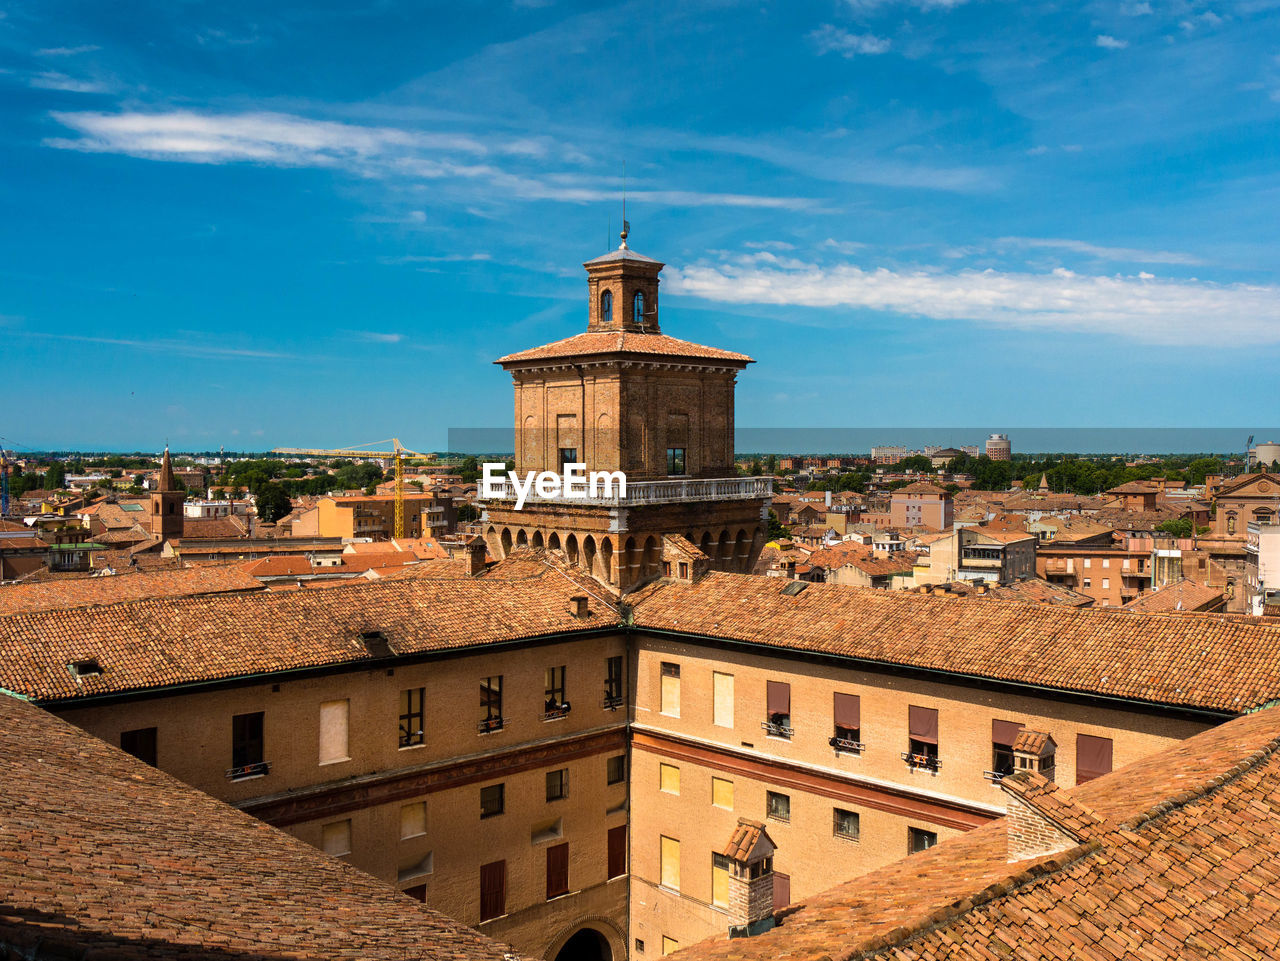 View from the medieval lion's tower of castello estense in ferrara, italy, over the city